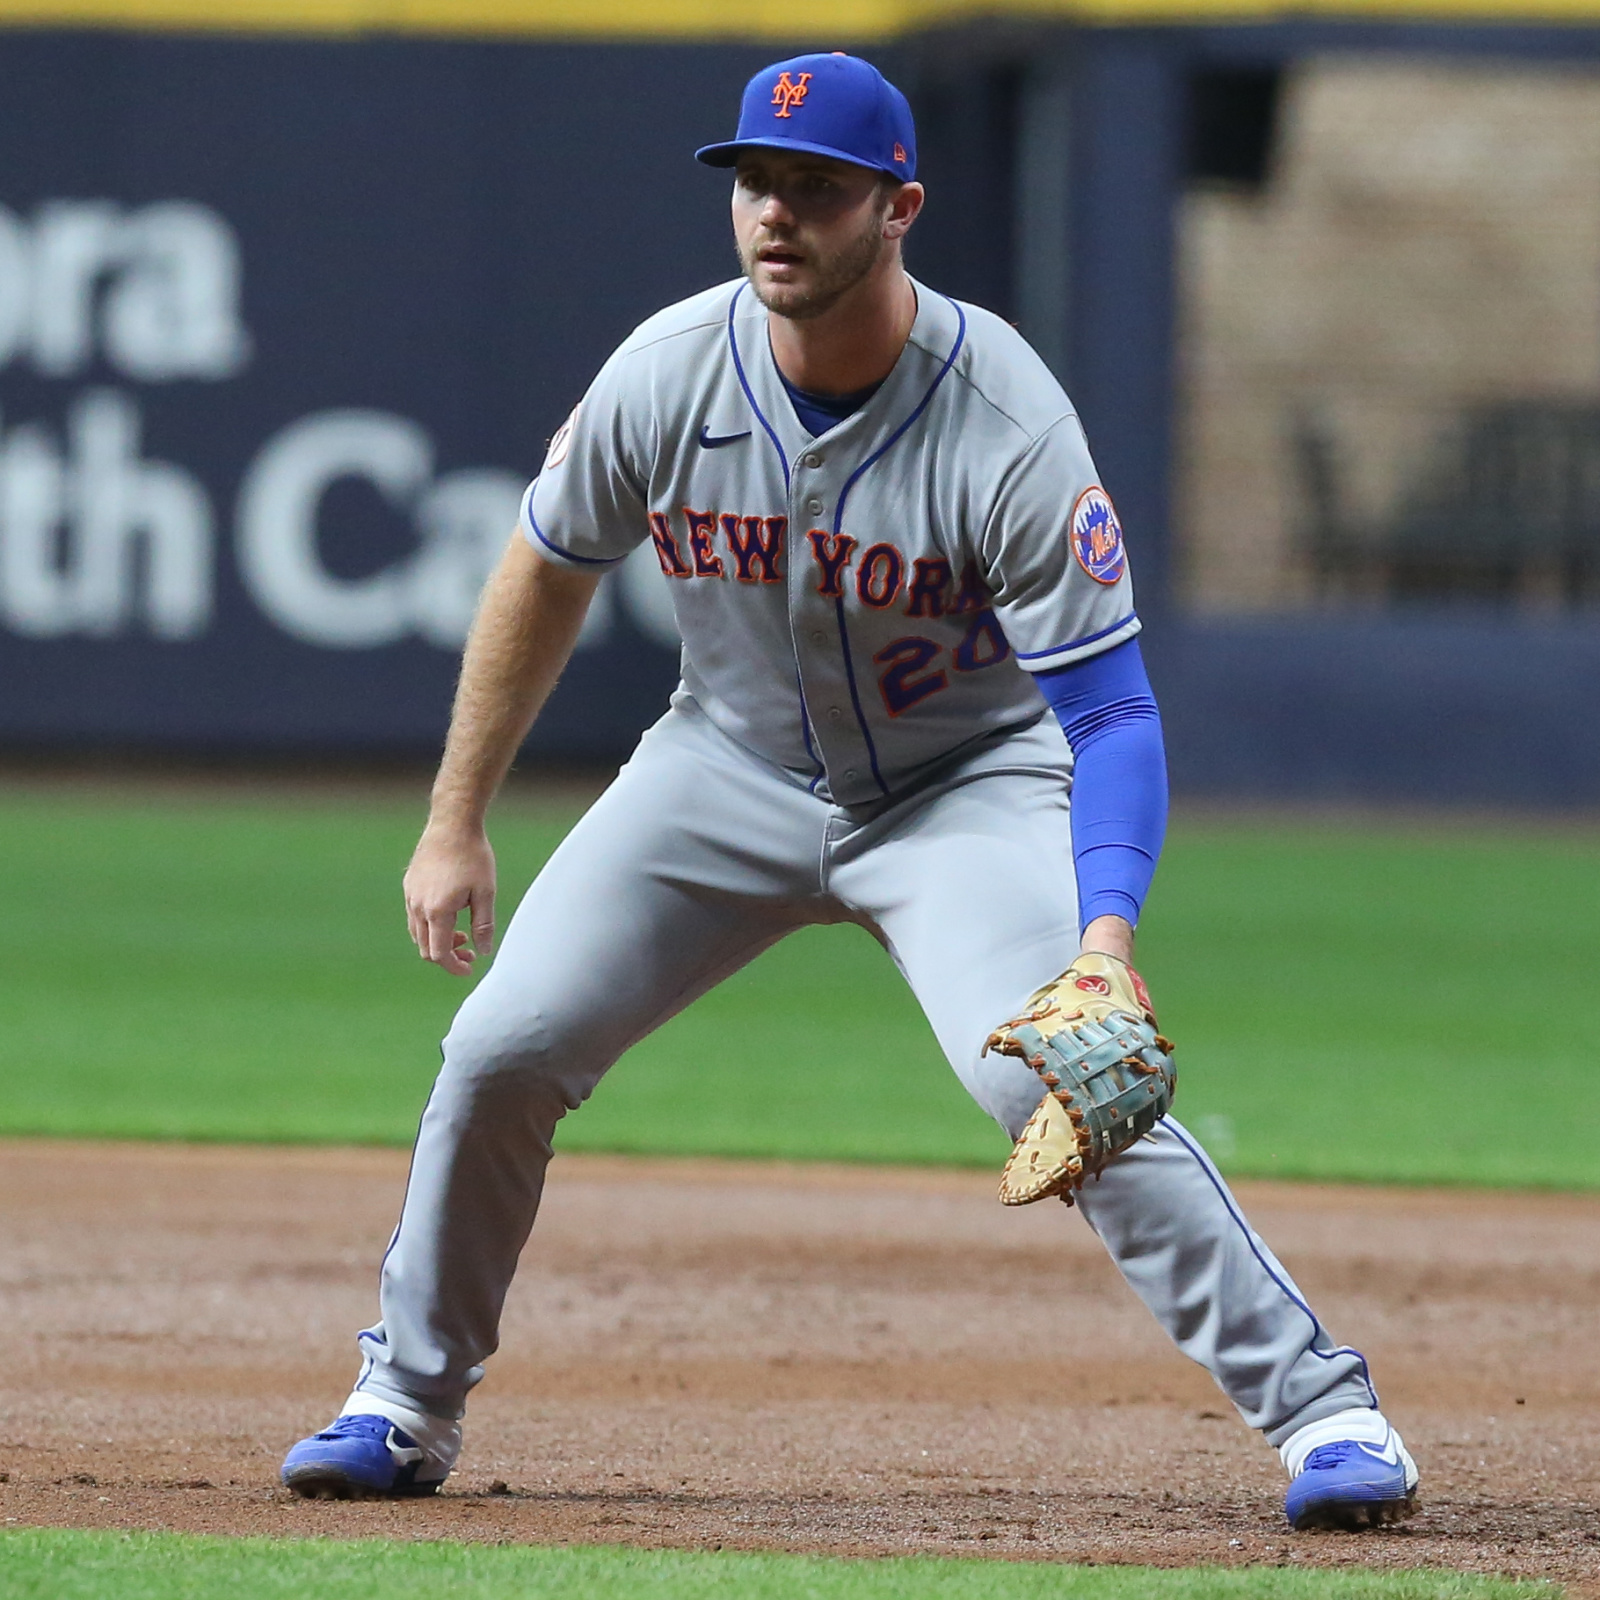 Pete Alonso Is Just the Big, Beefy Slugger the New York Mets Need